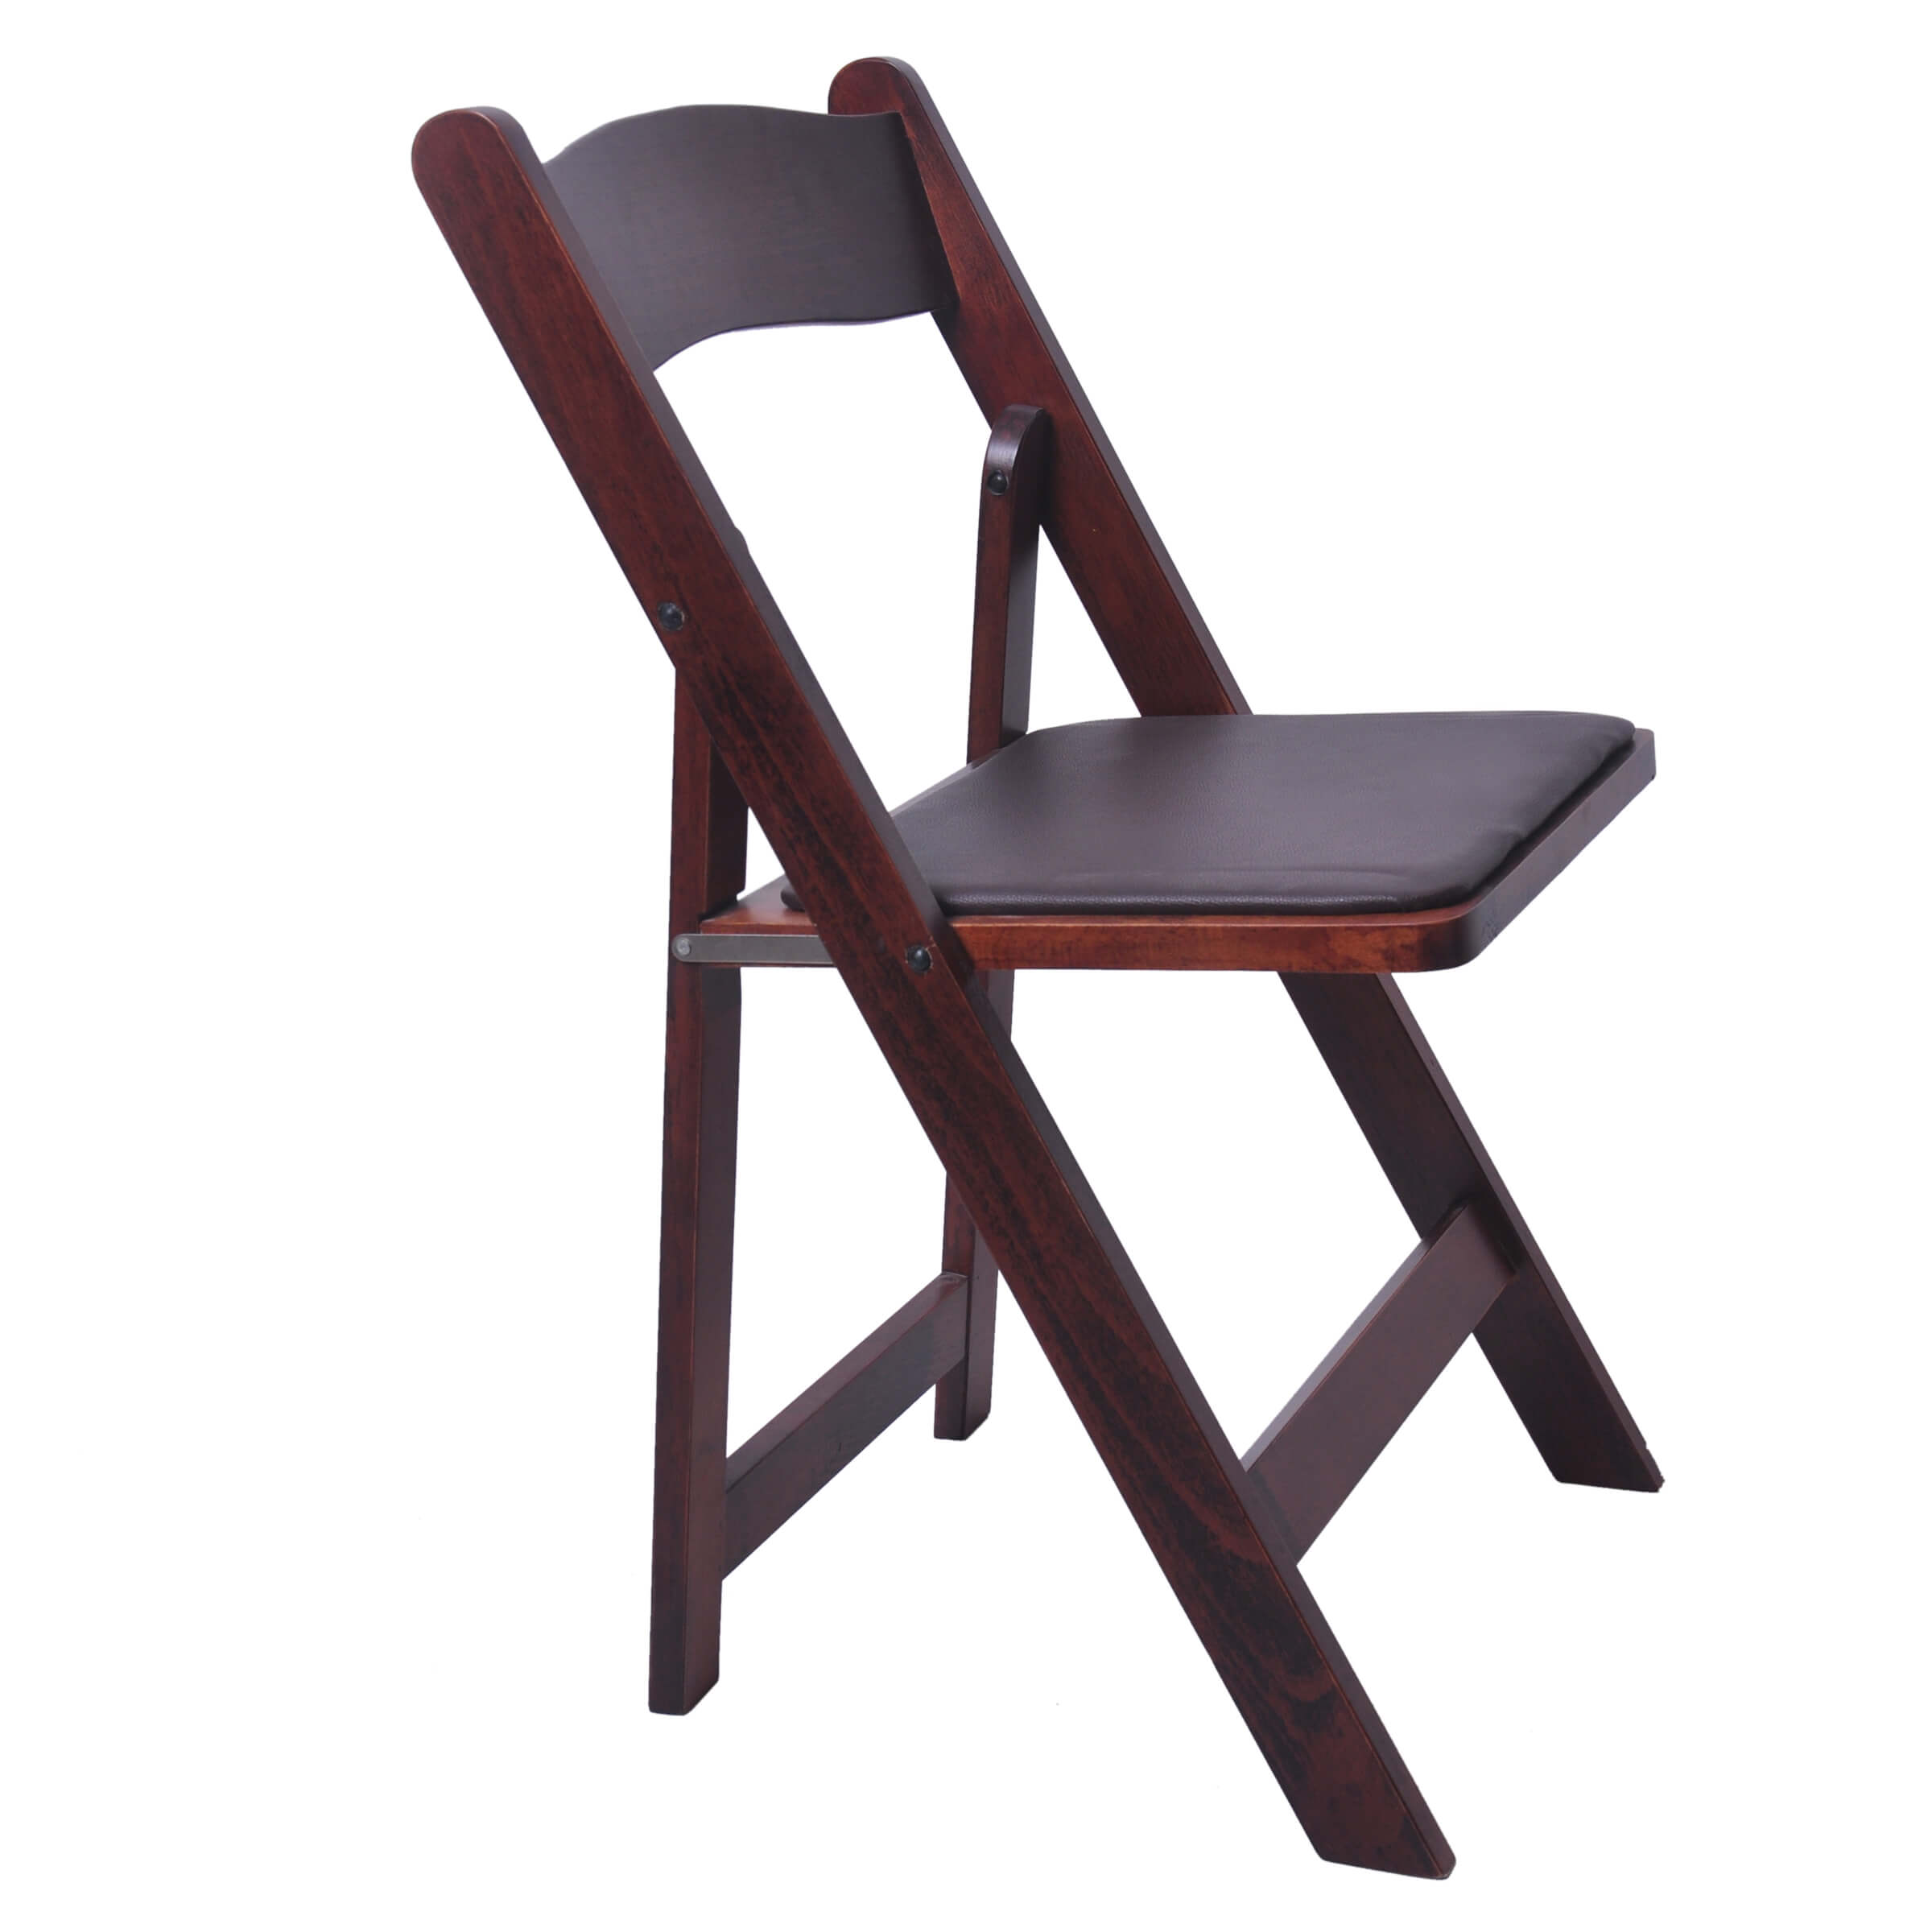 Wooden Folding Chairs Wholesale | Padded Folding Chair With Cushions